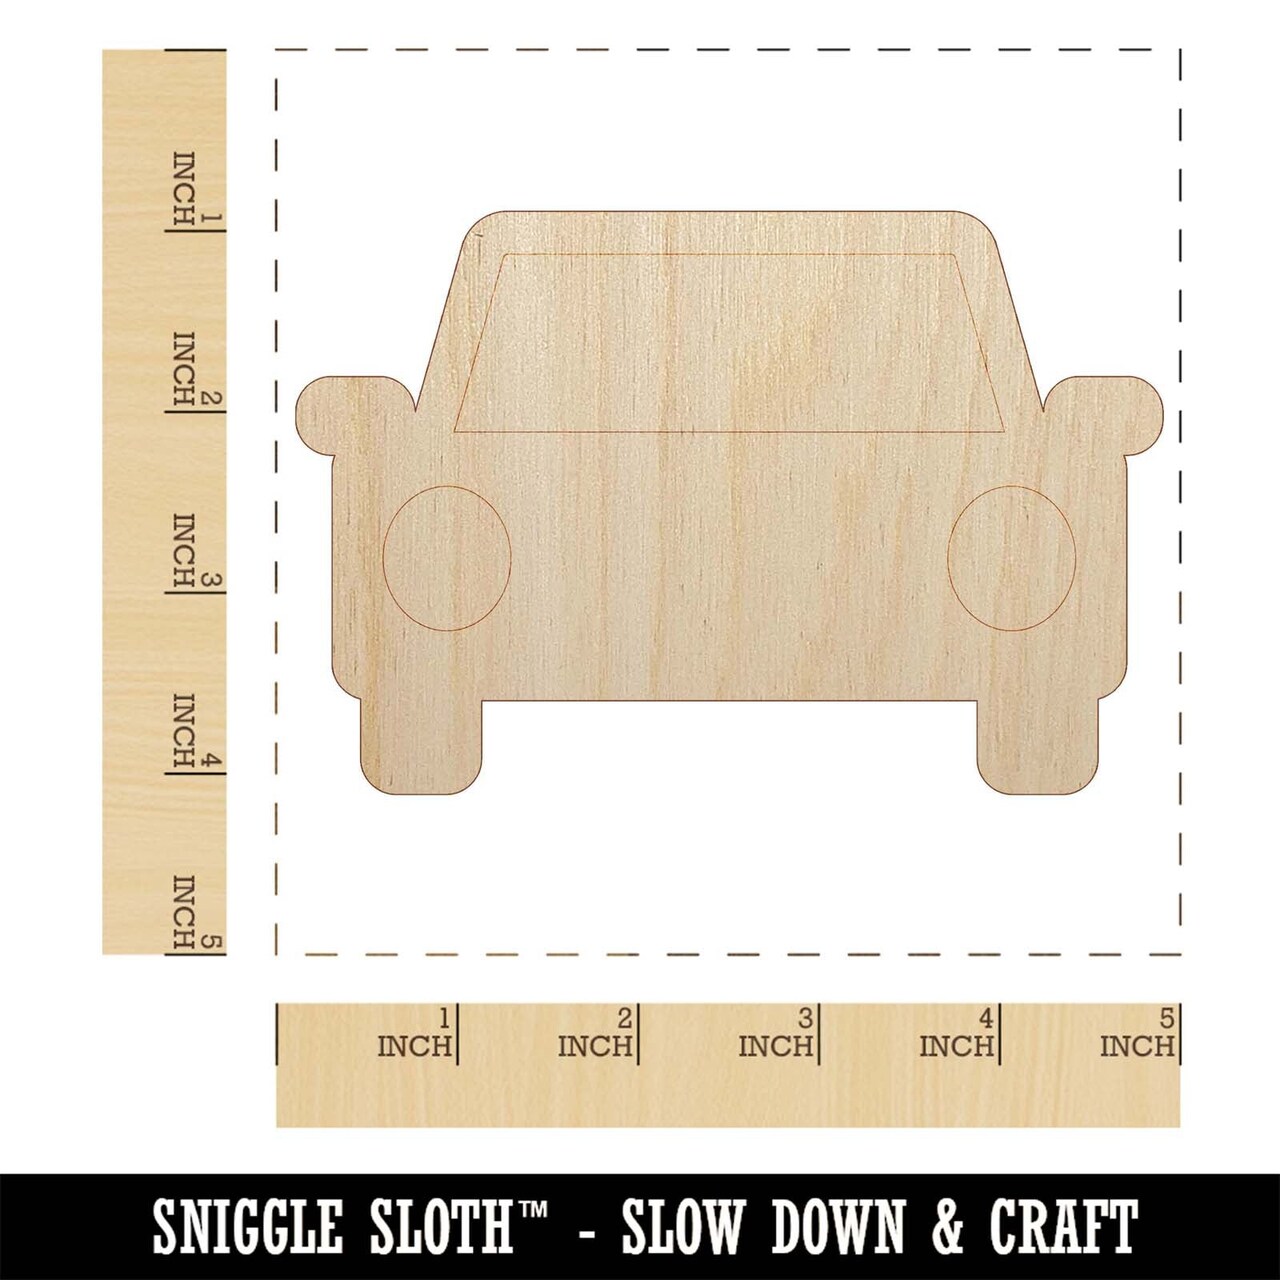 Parked Car Automobile Icon Unfinished Wood Shape Piece Cutout for DIY Craft Projects